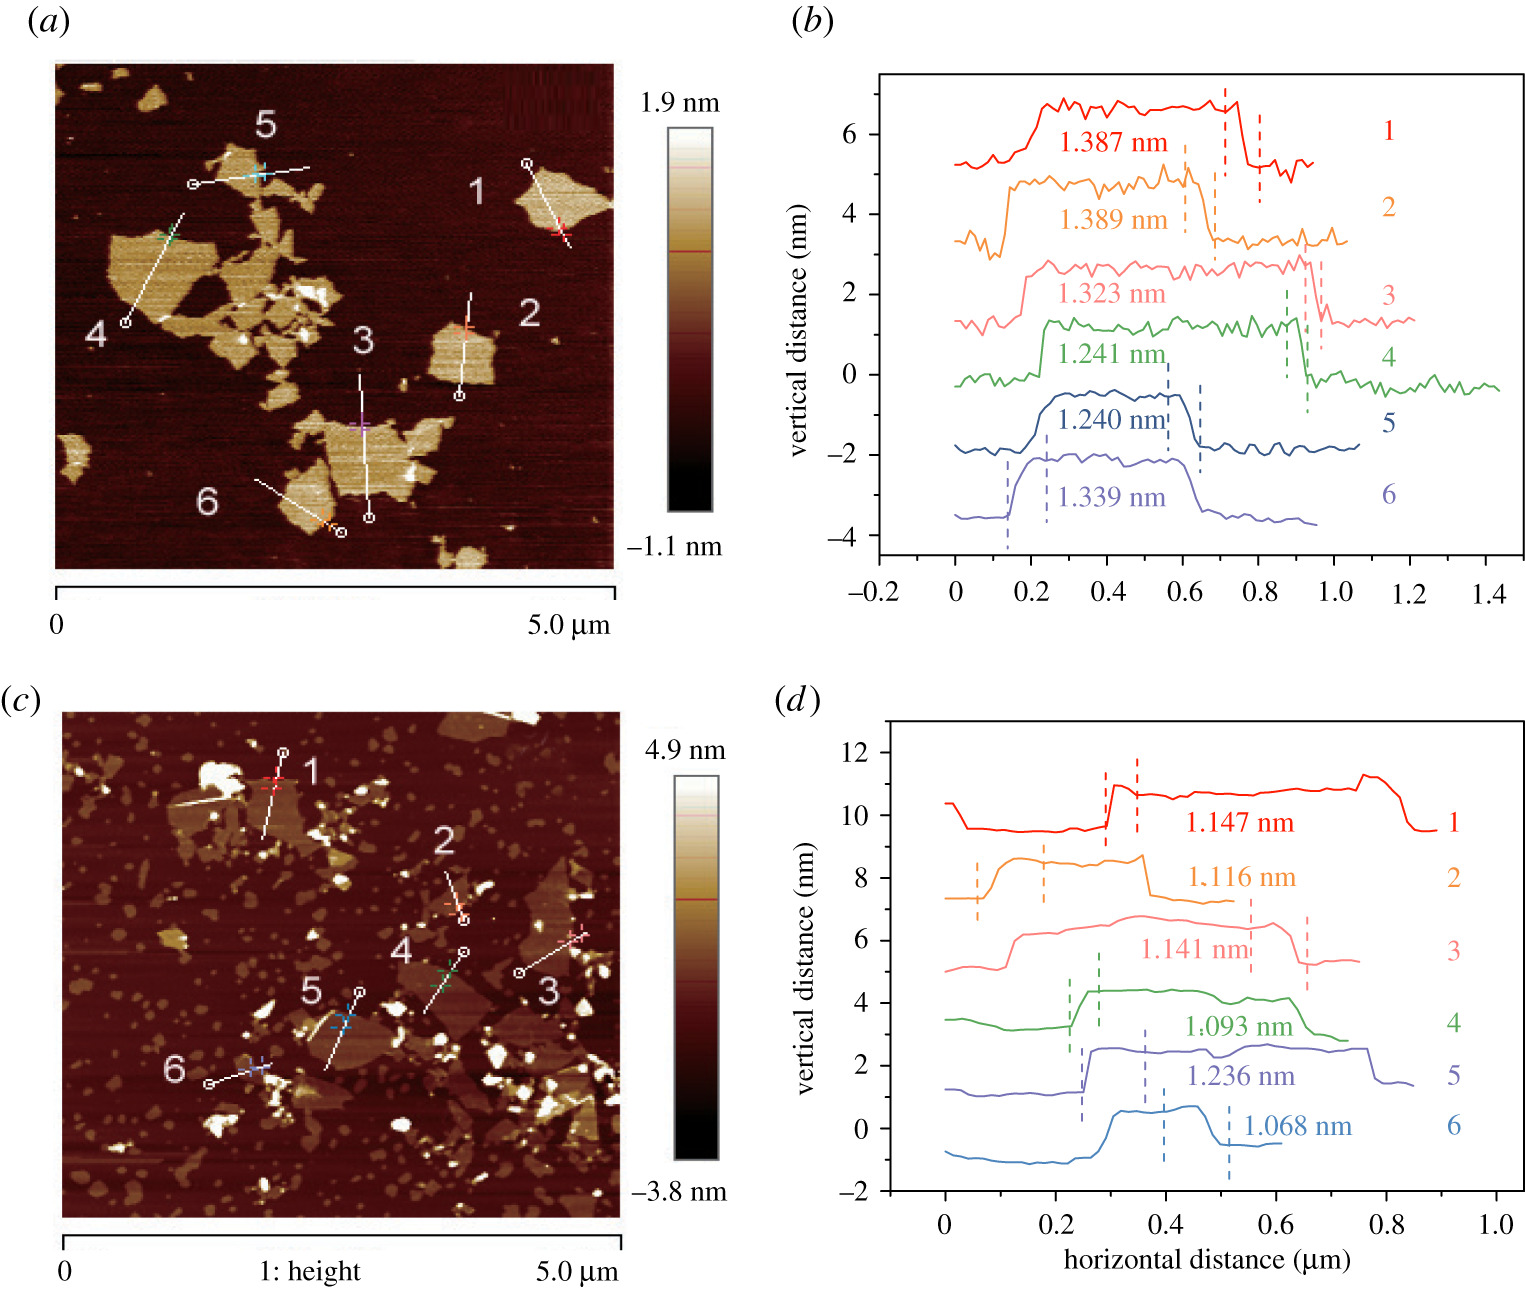 AFM images of graphene oxide prepared after 5 days (GO) and graphene oxide aged for 2 years (GO-a). The topography of graphene oxide: (a) GO and (c) GO-a. Interlayer spacing of graphene oxide: (b) GO and (d) GO-a.